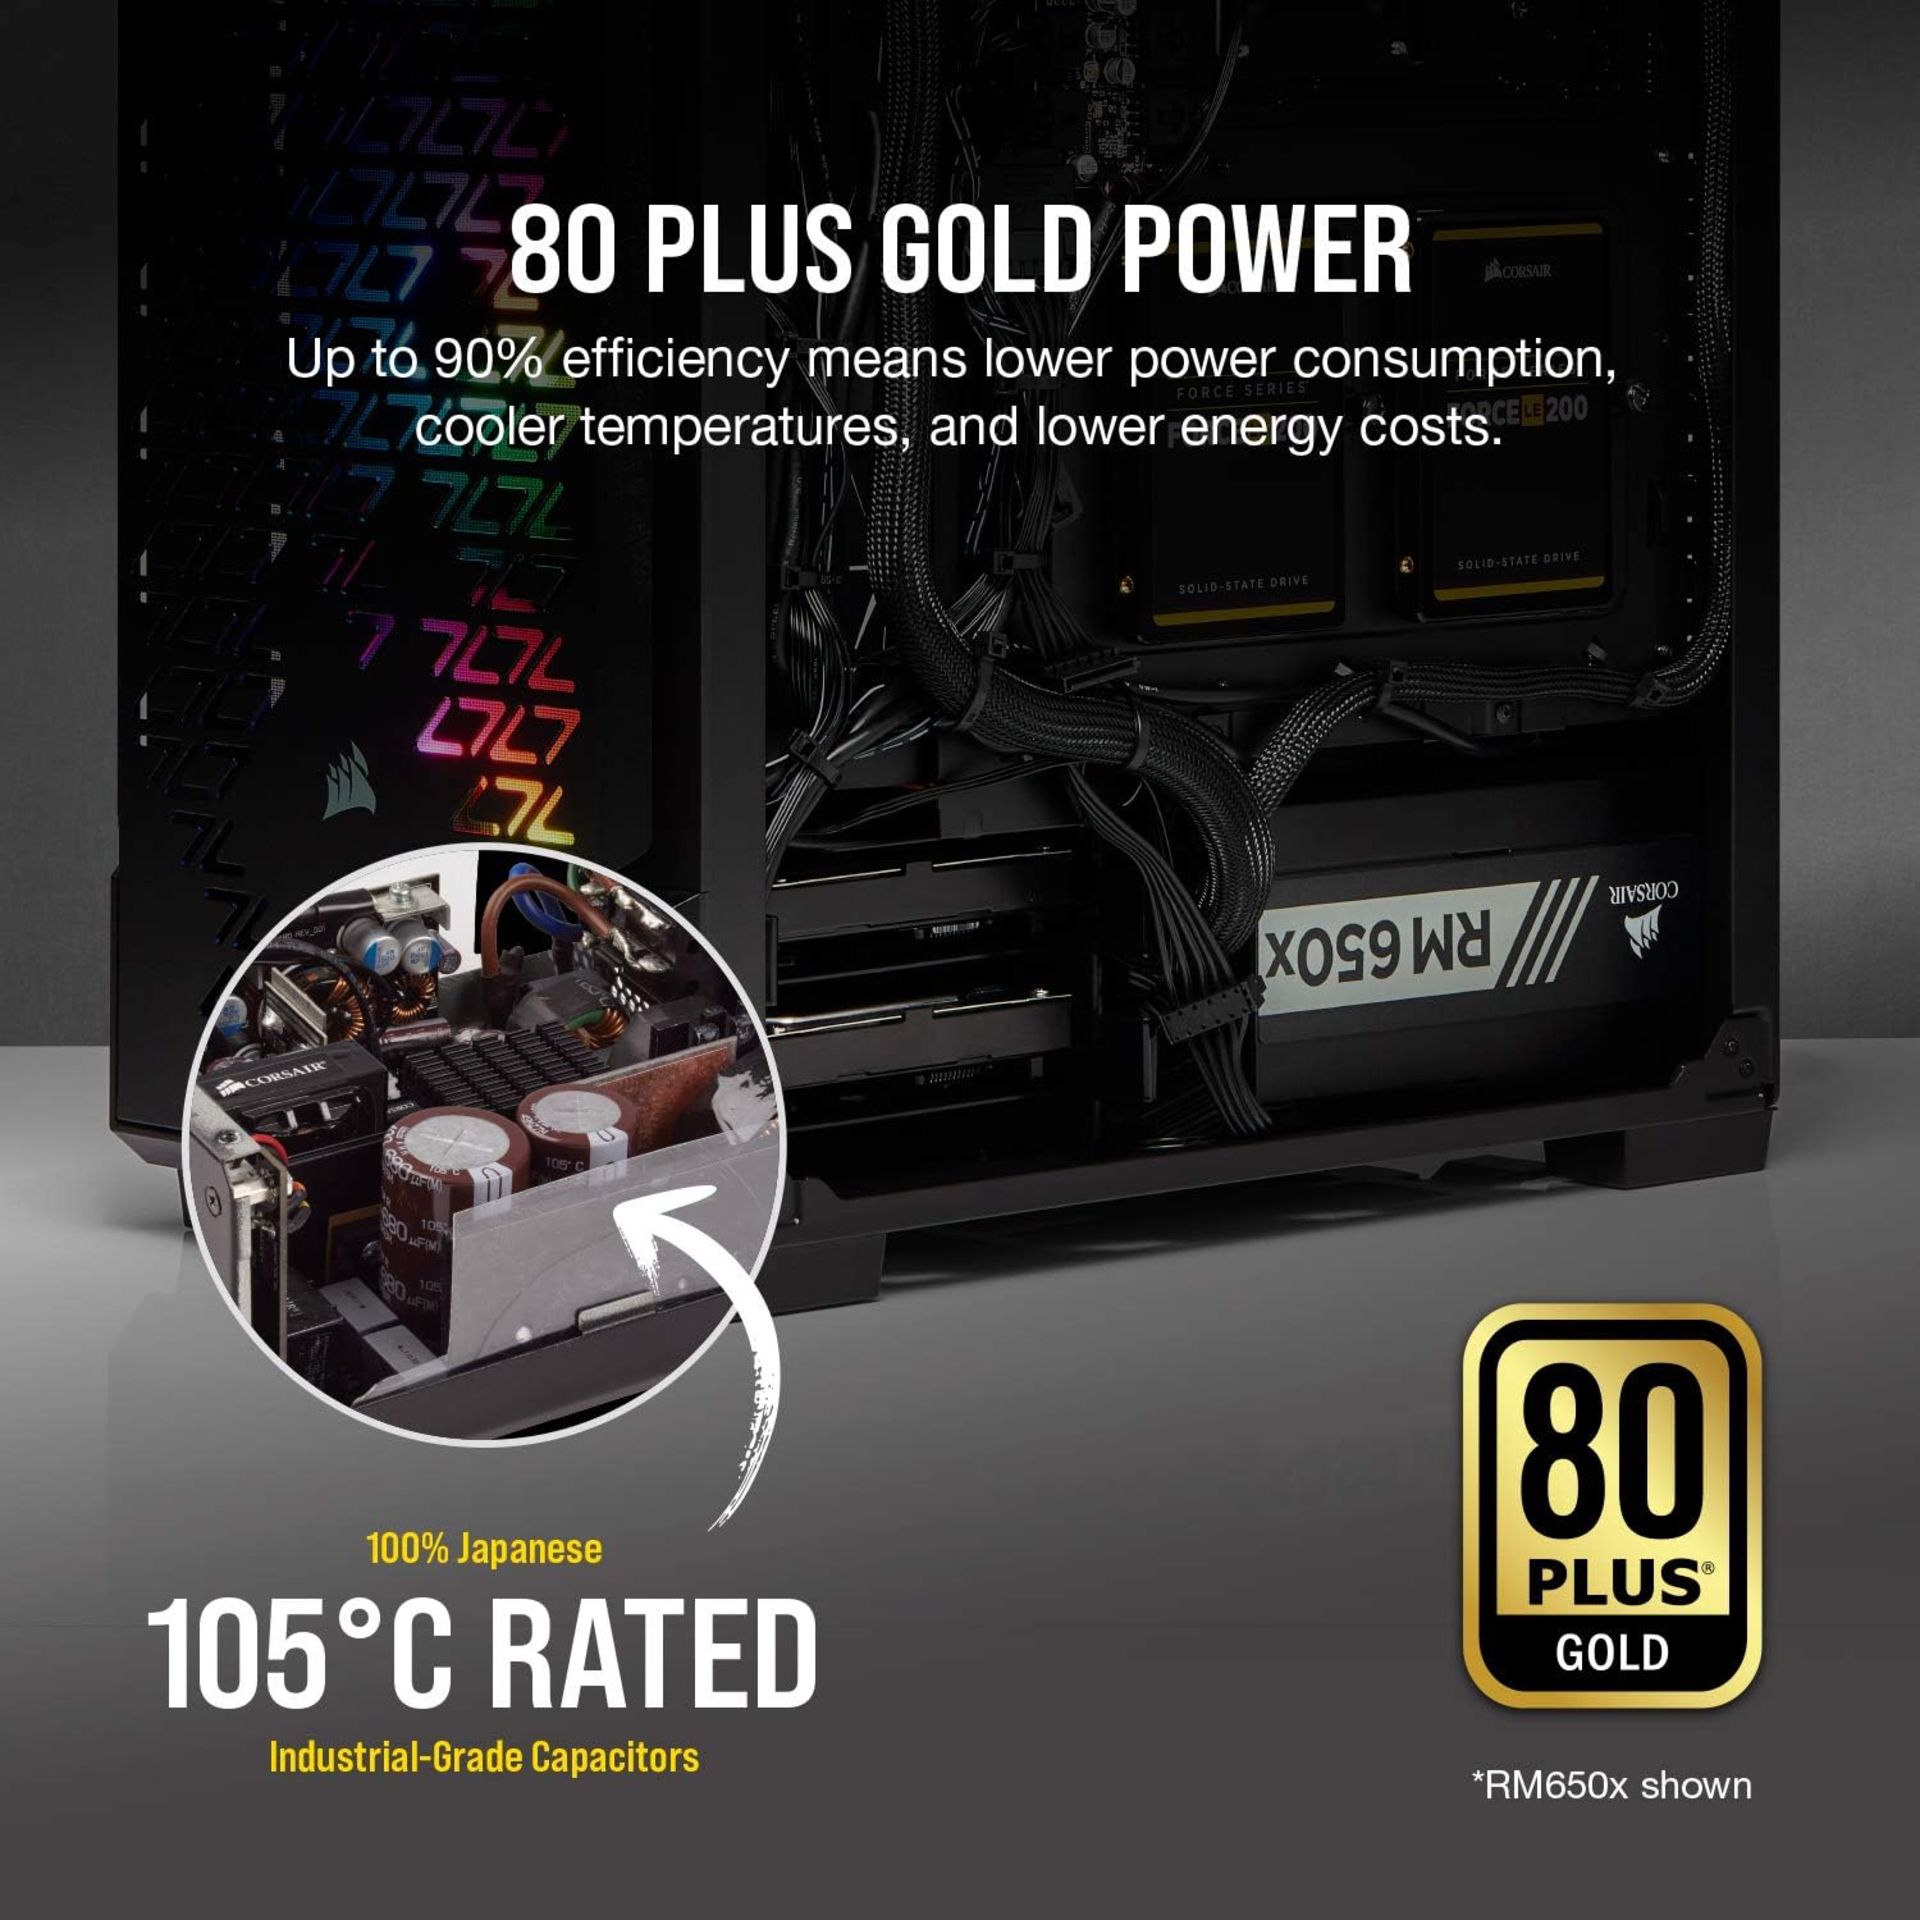 BRAND NEW FACTORY SEALED CORSAIR RM750x 80 PLUS Gold 750 W Fully Modular ATX Power Supply Unit. - Image 3 of 10